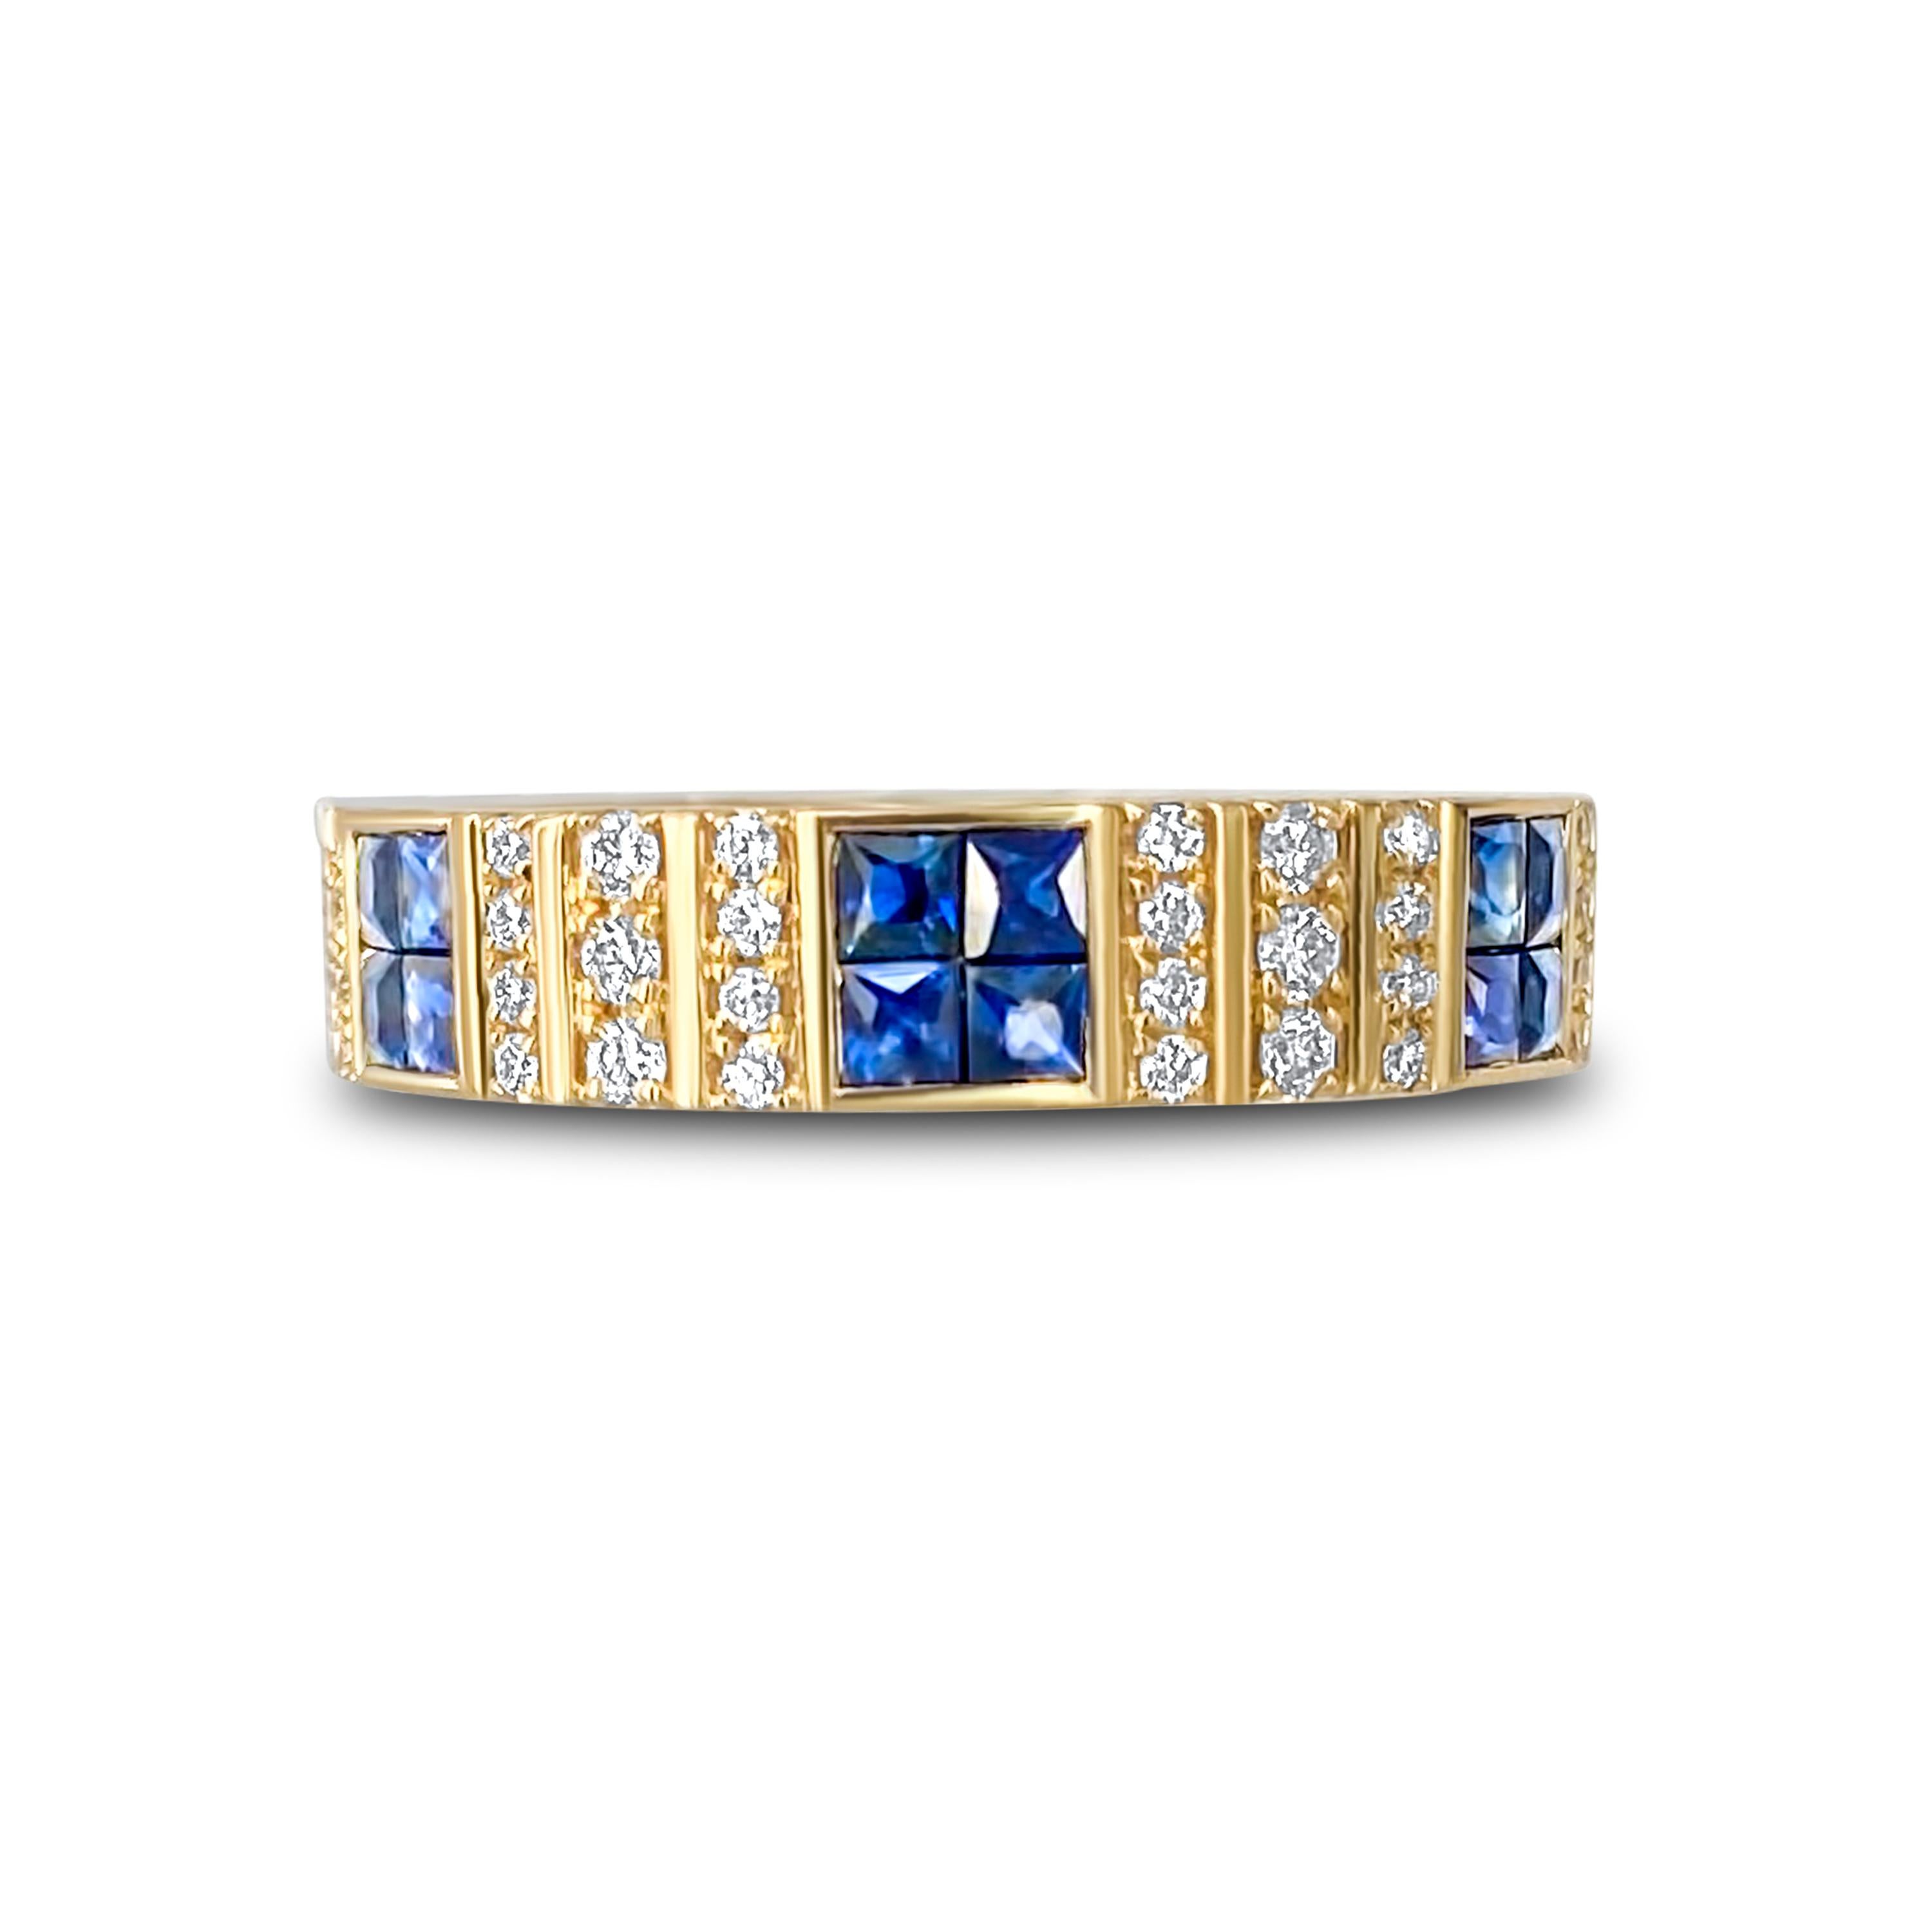 Pinstripe Strength Diamond Cigar Band Skinny Ring with Sapphire Inlay For Sale 2